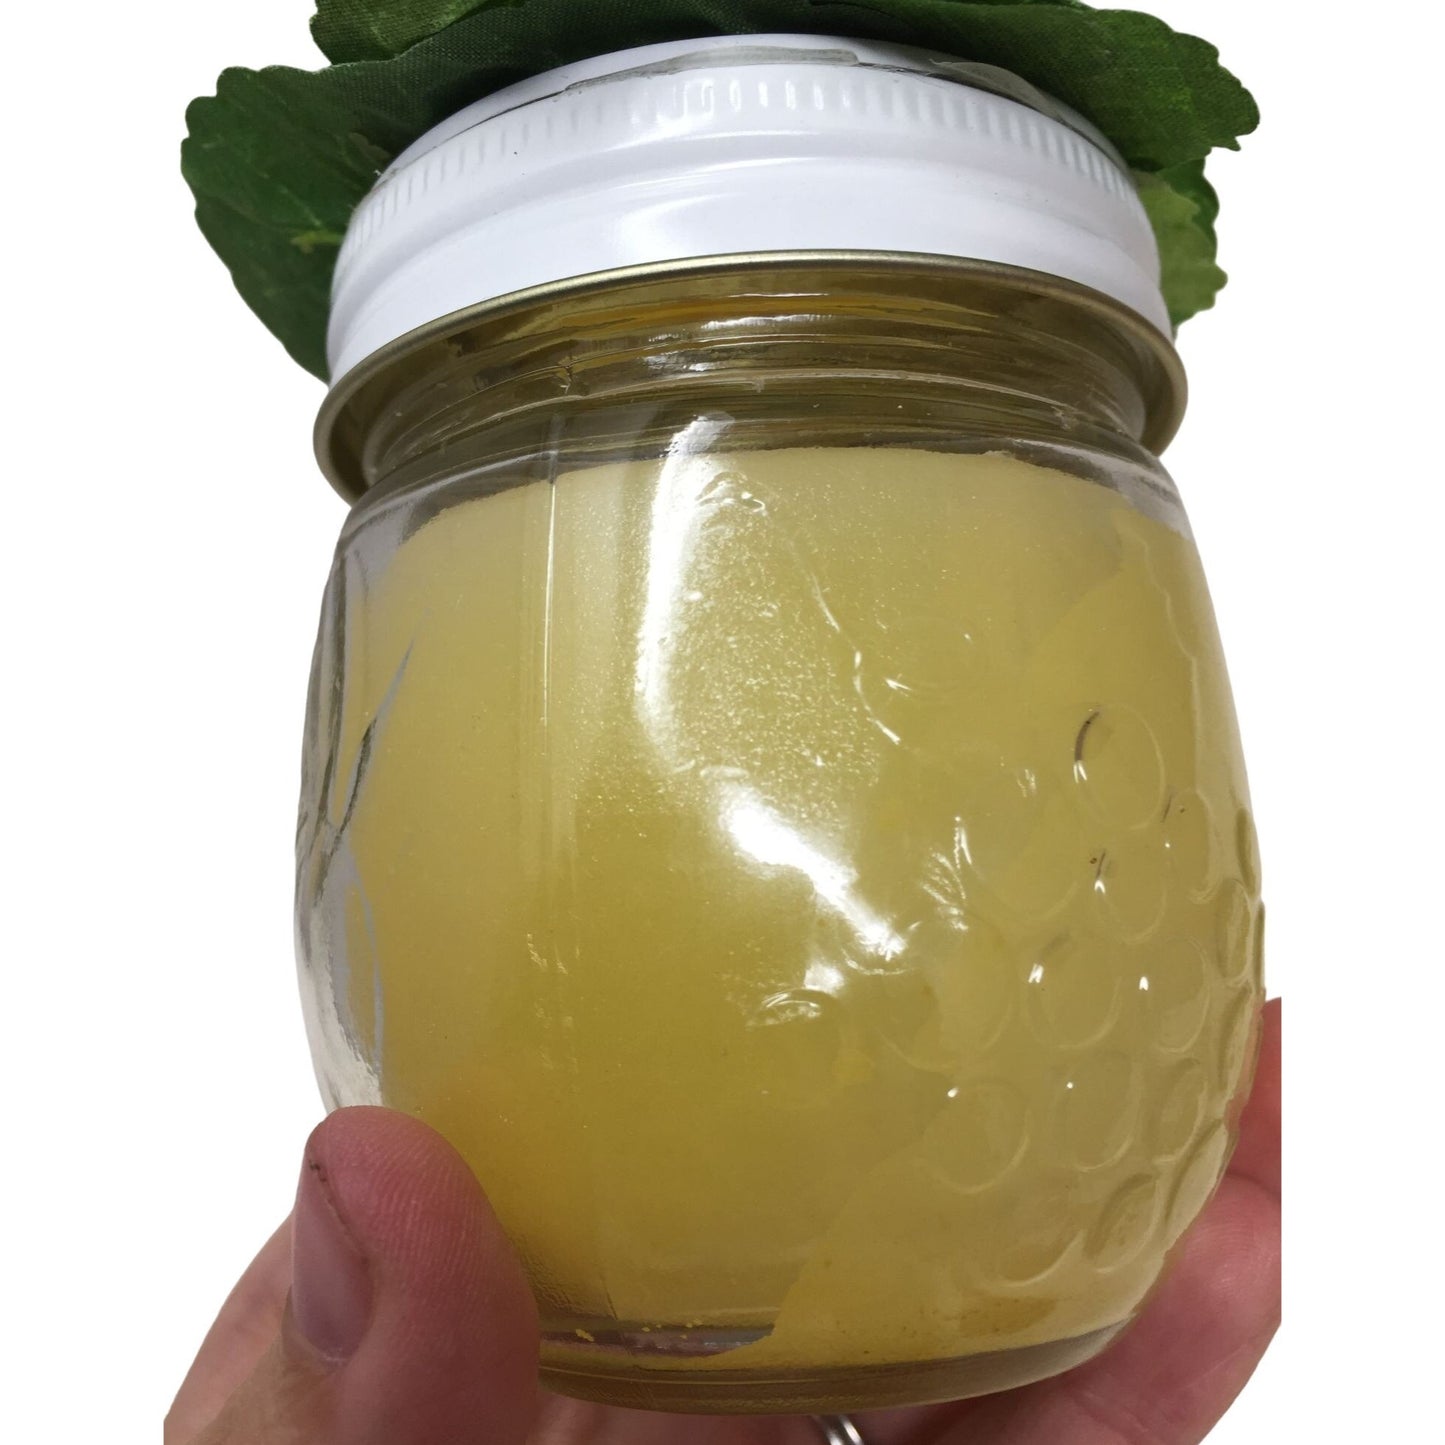 Great-Grandma's Candles - LEMON Flavor Scent - New and unused Pint Jar Candle